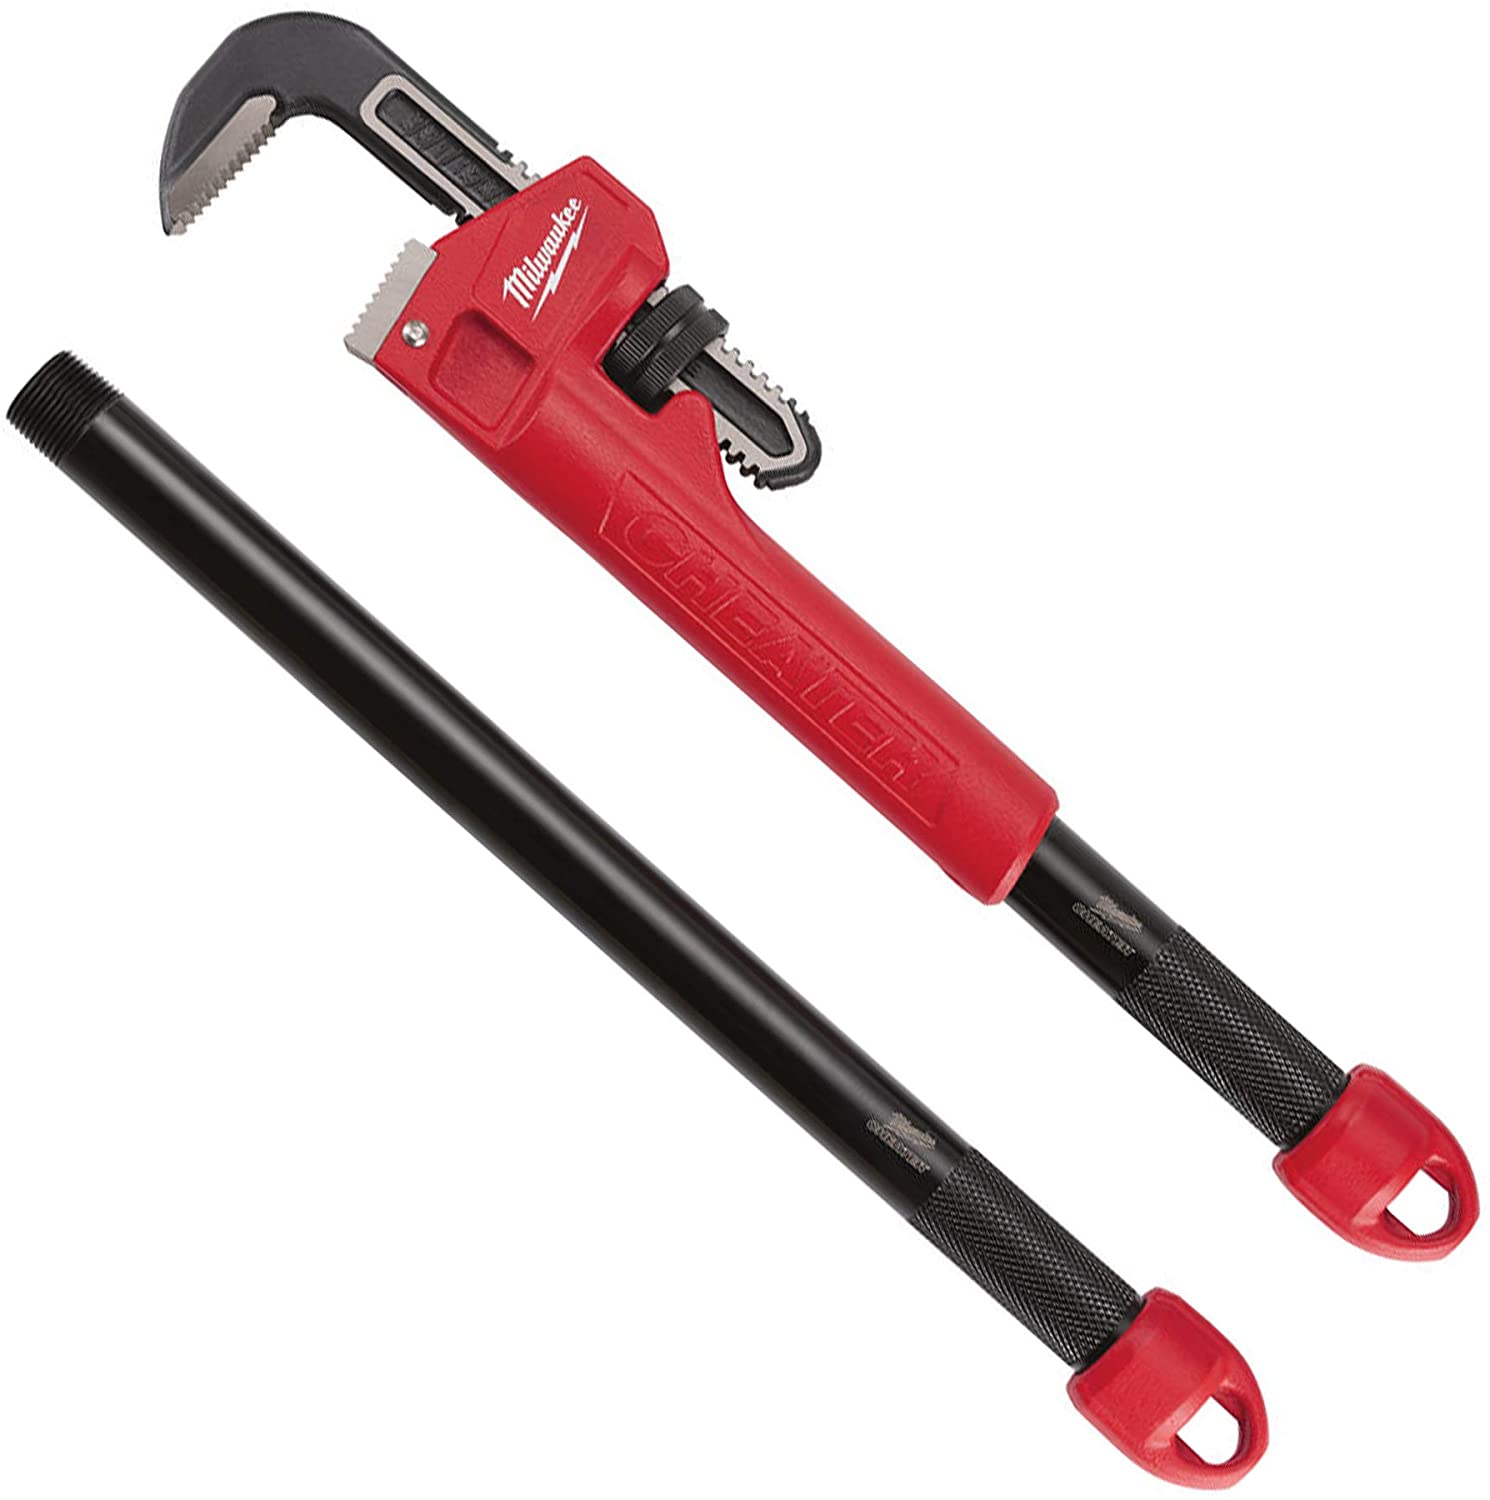 71nvBmbJ LL. AC SL1500 14IN CHEATER PIPE WRENCH